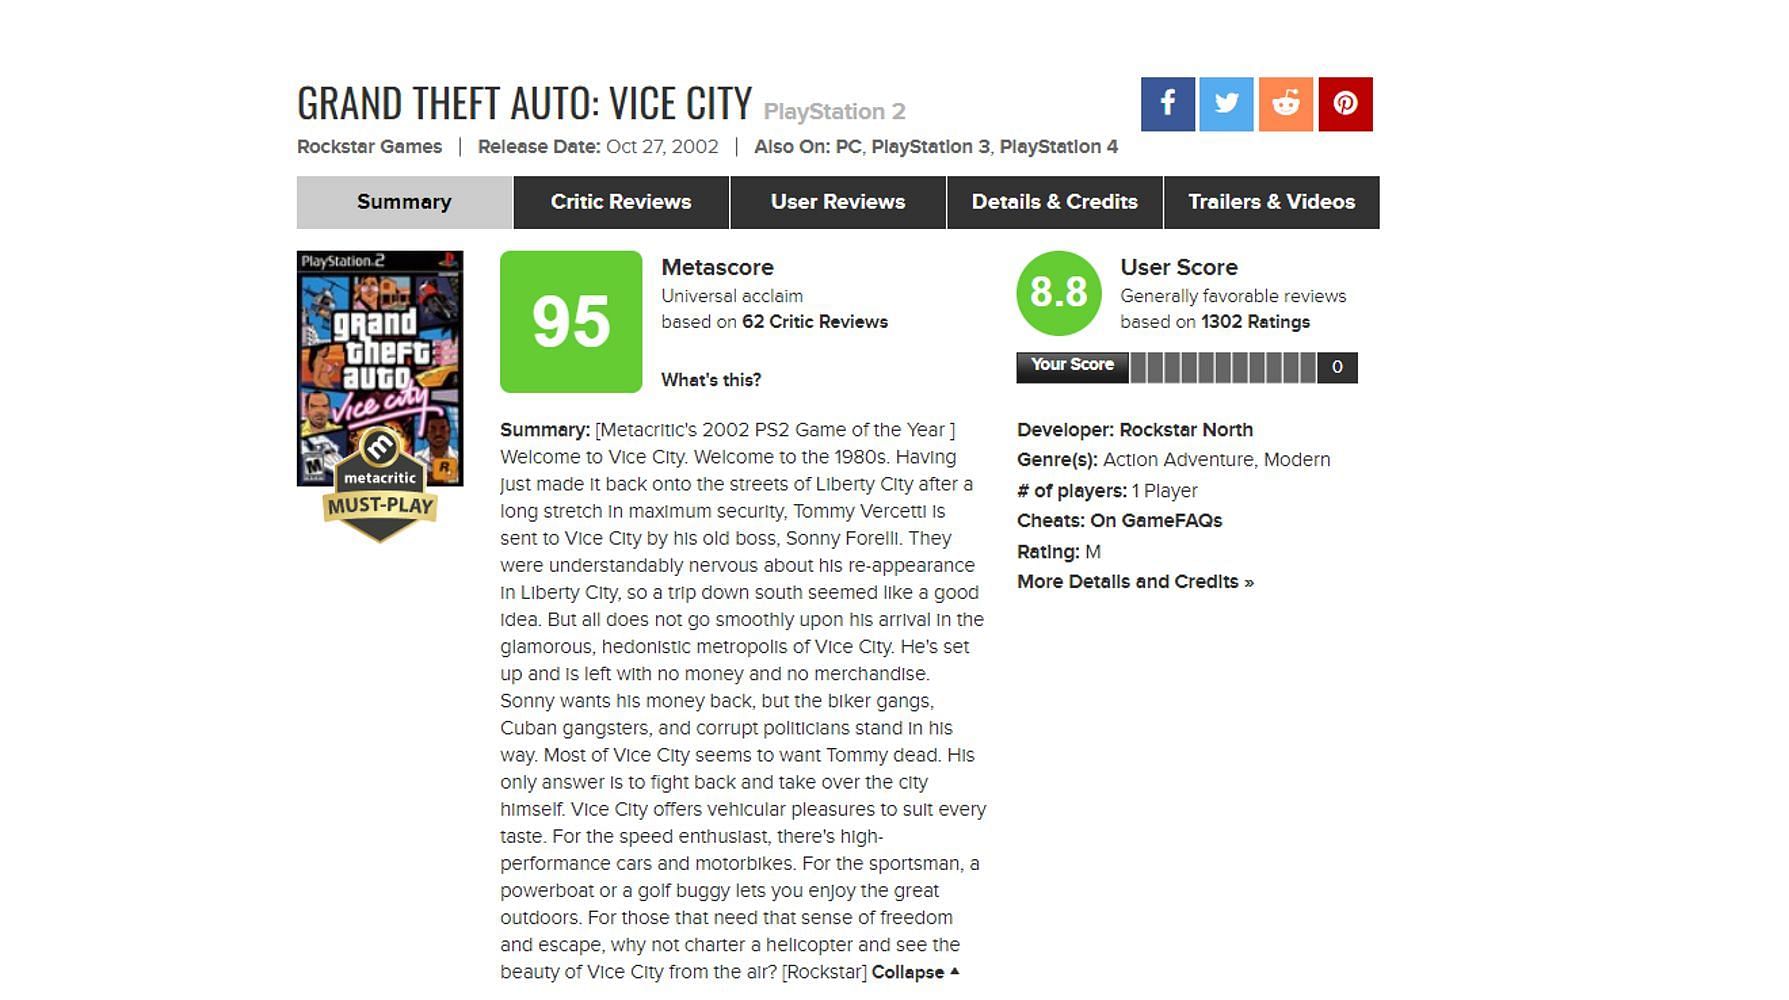 The game has a score of 95 out of 100 on Metacritic from critics (Image via Metacritic)